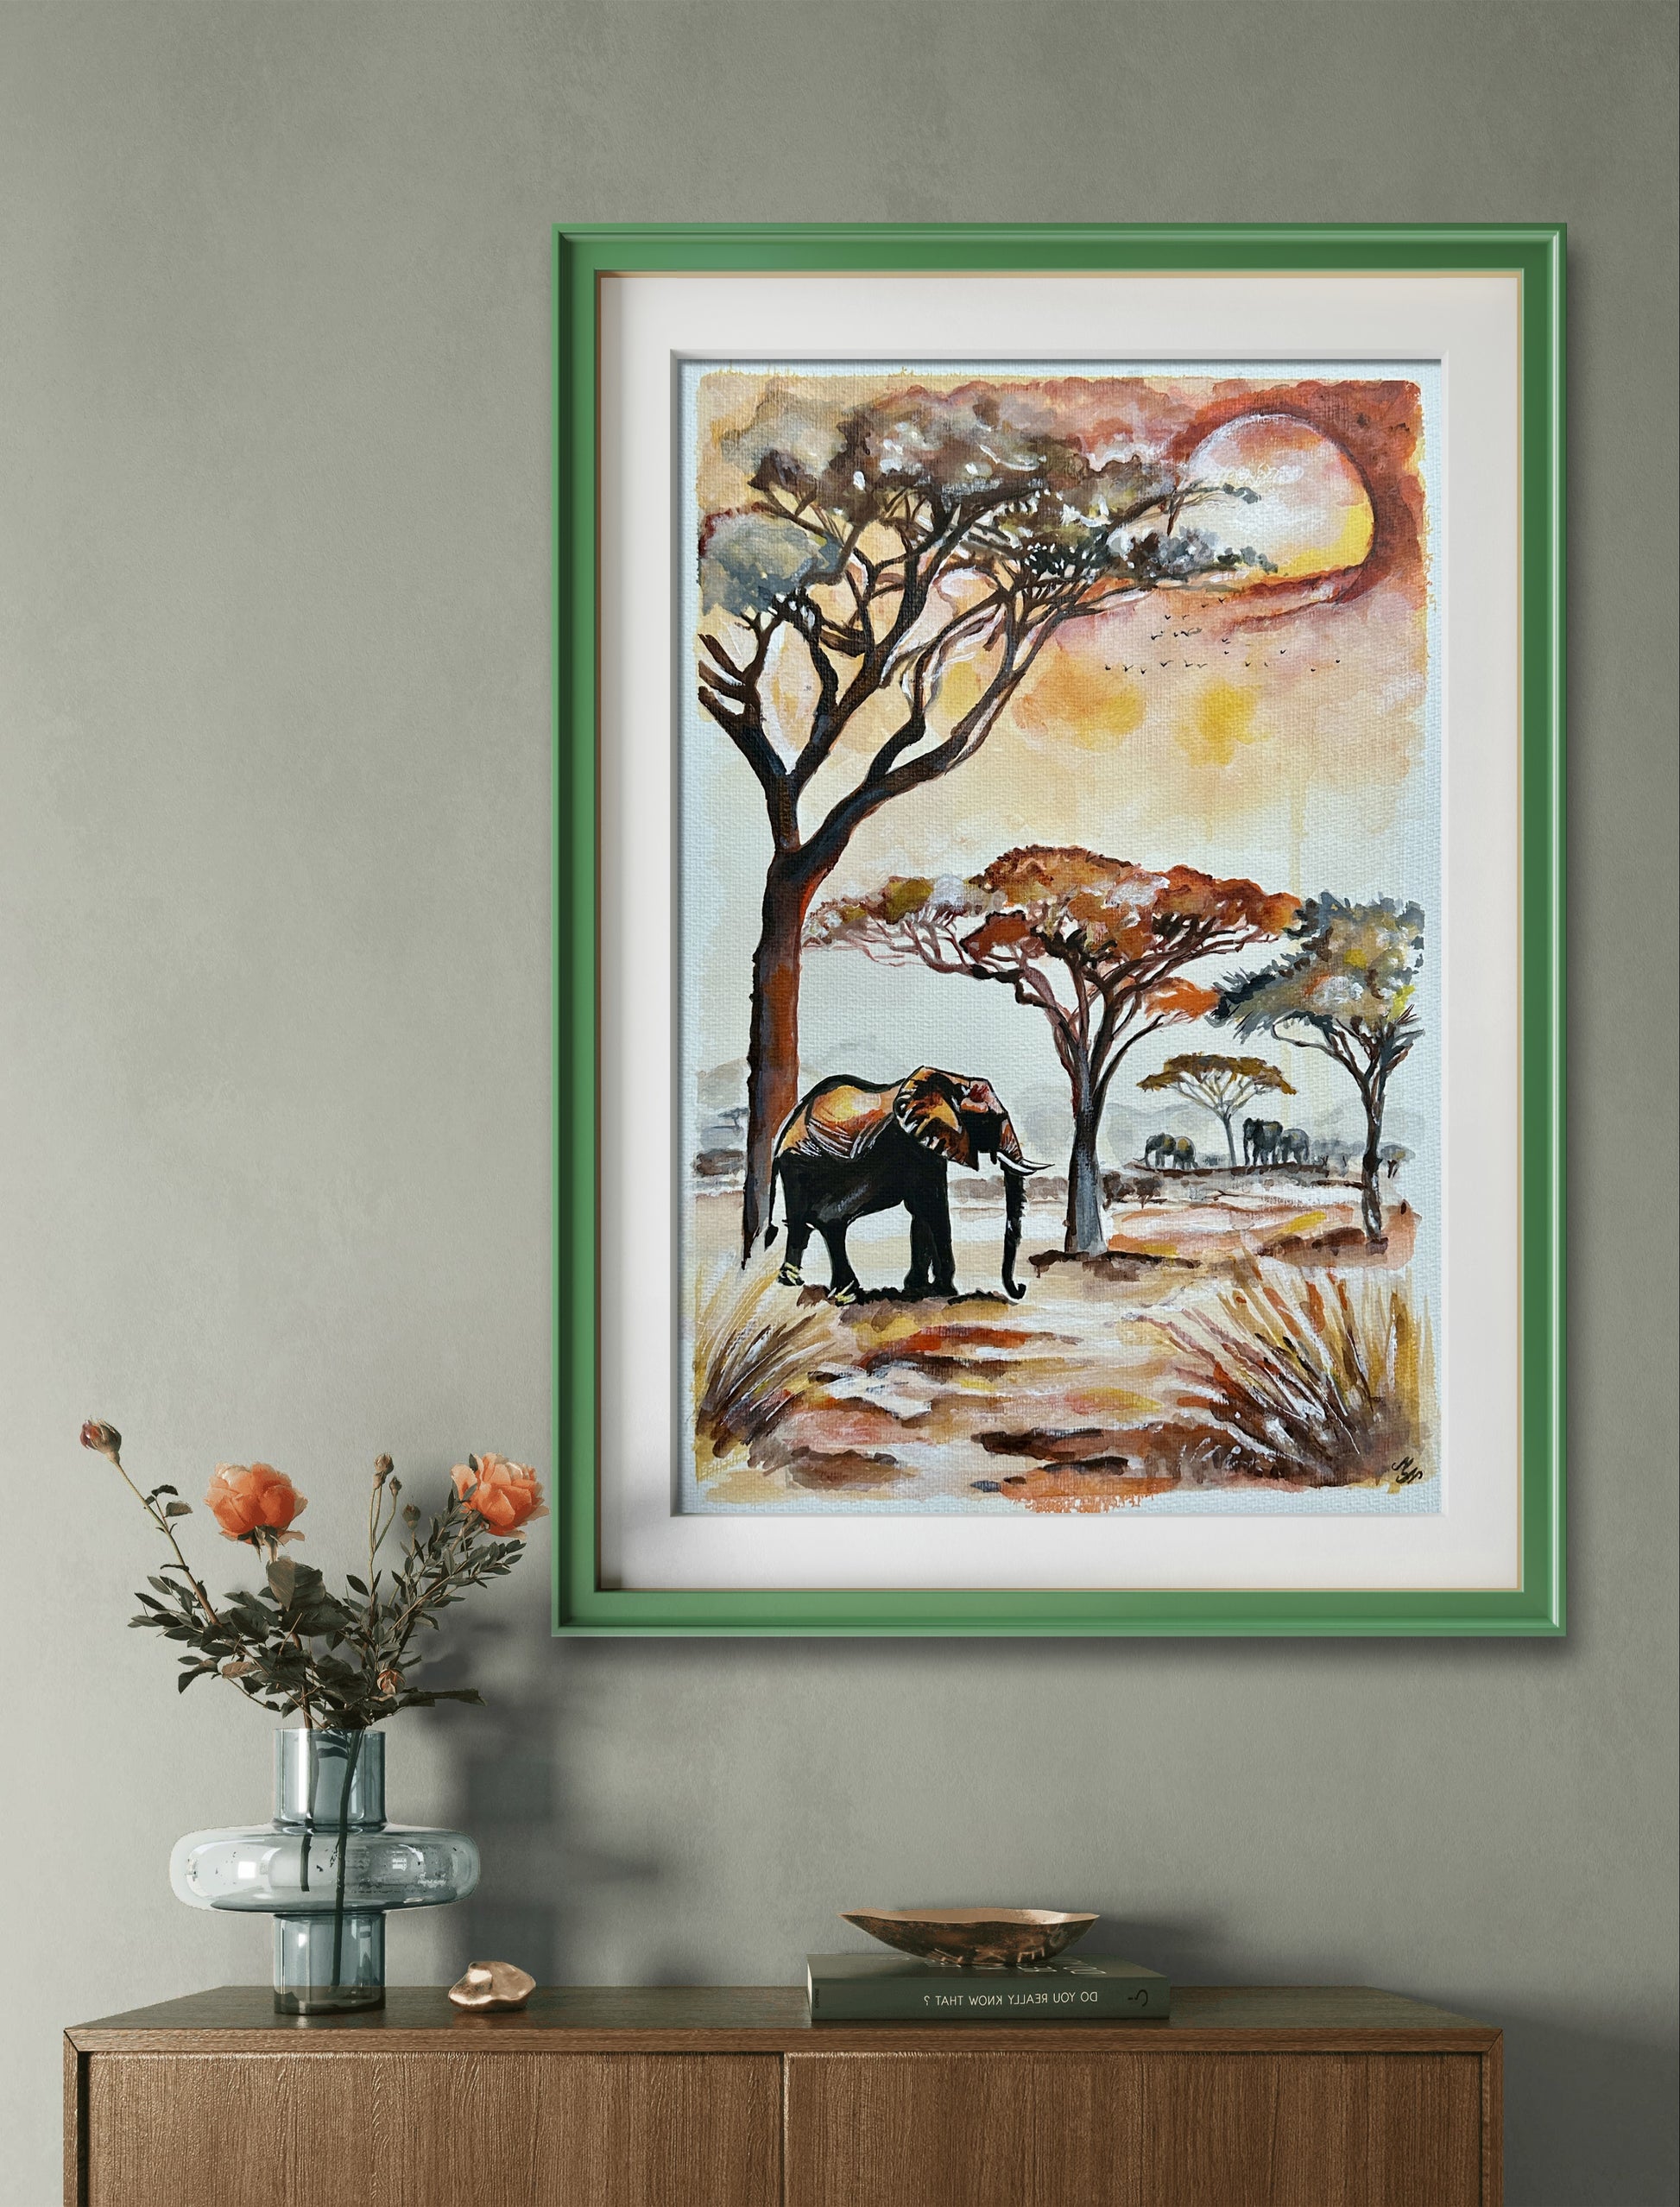 African safari scene bursting with vibrant colors and dynamic energy.